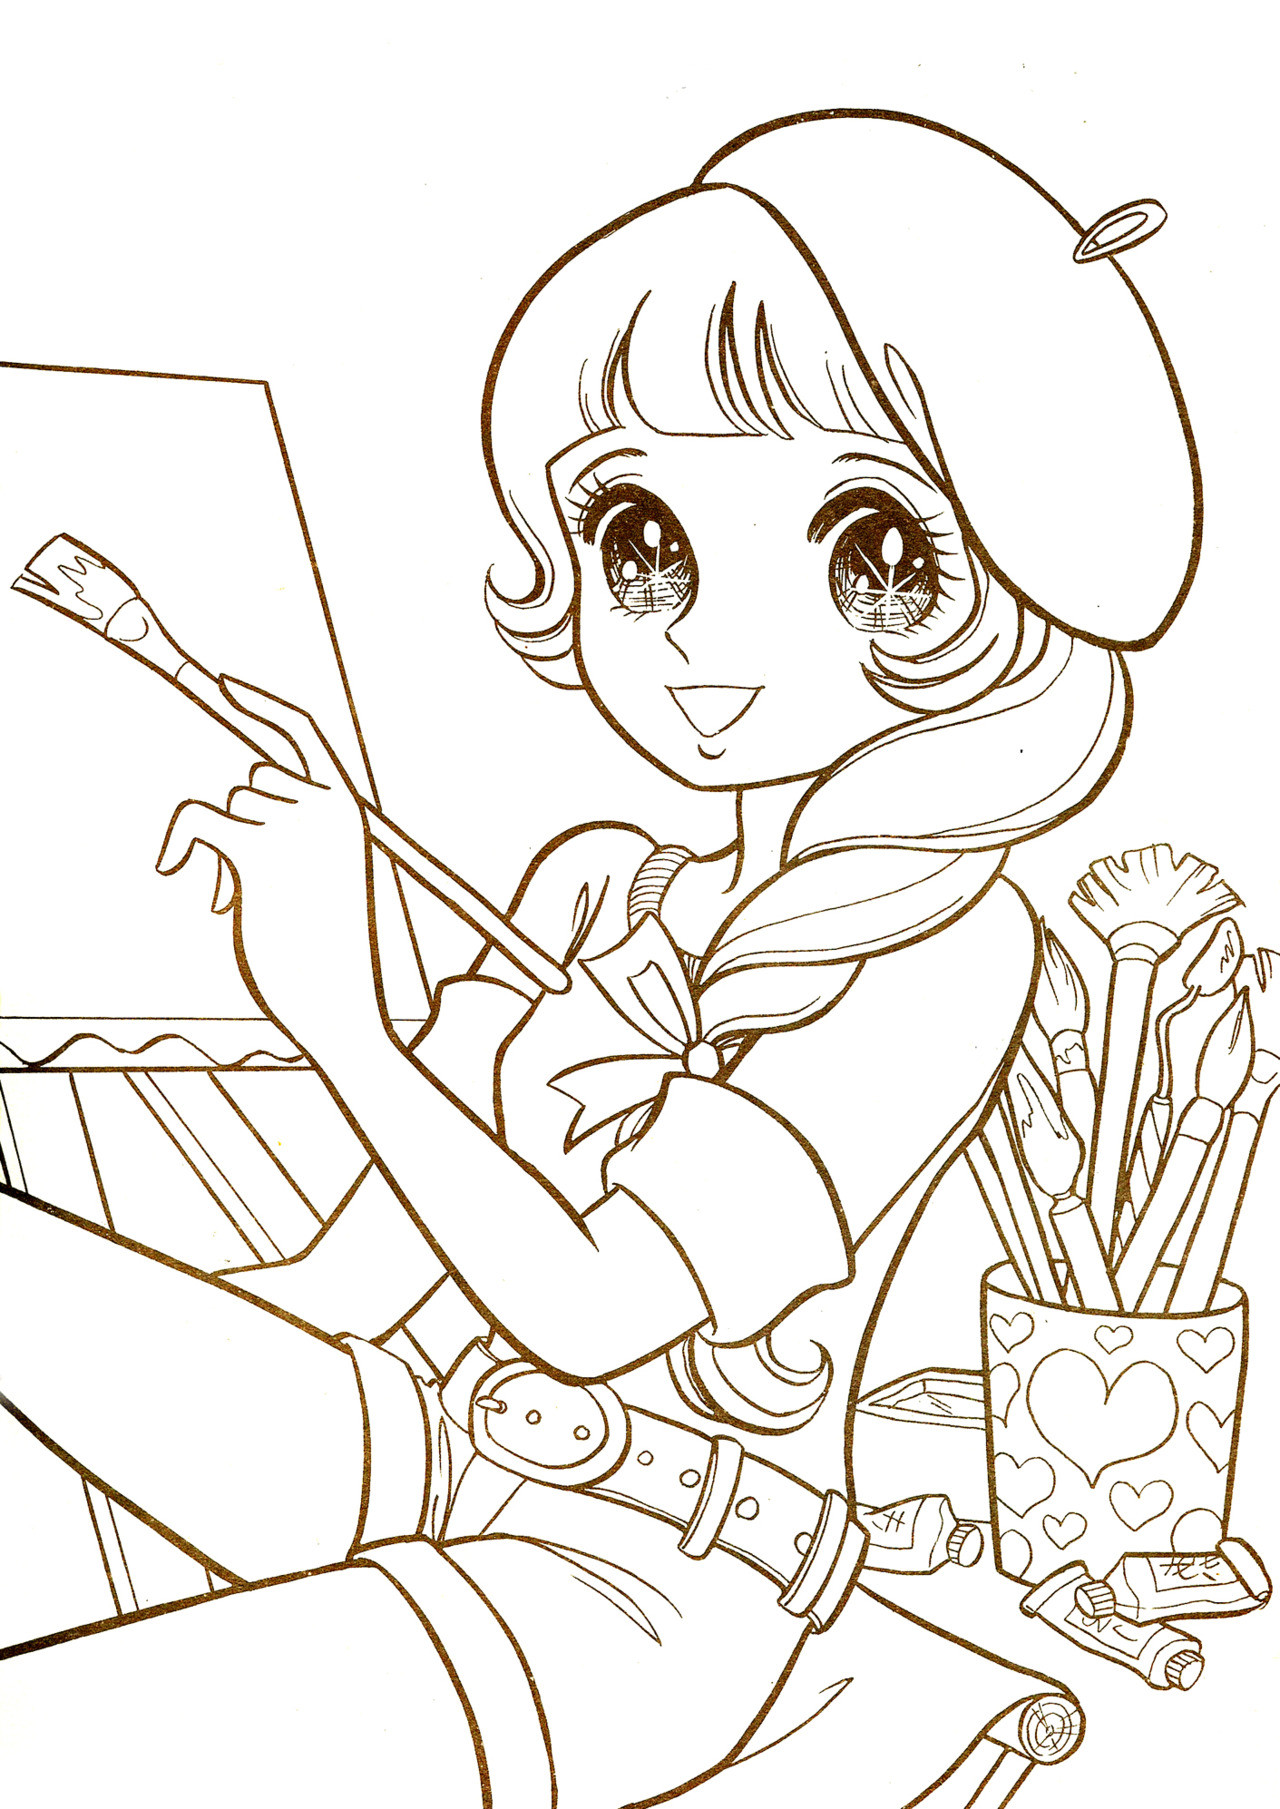 Manga Coloring Pages For Adults
 Kilari Manga Coloring Pages Archives 7376